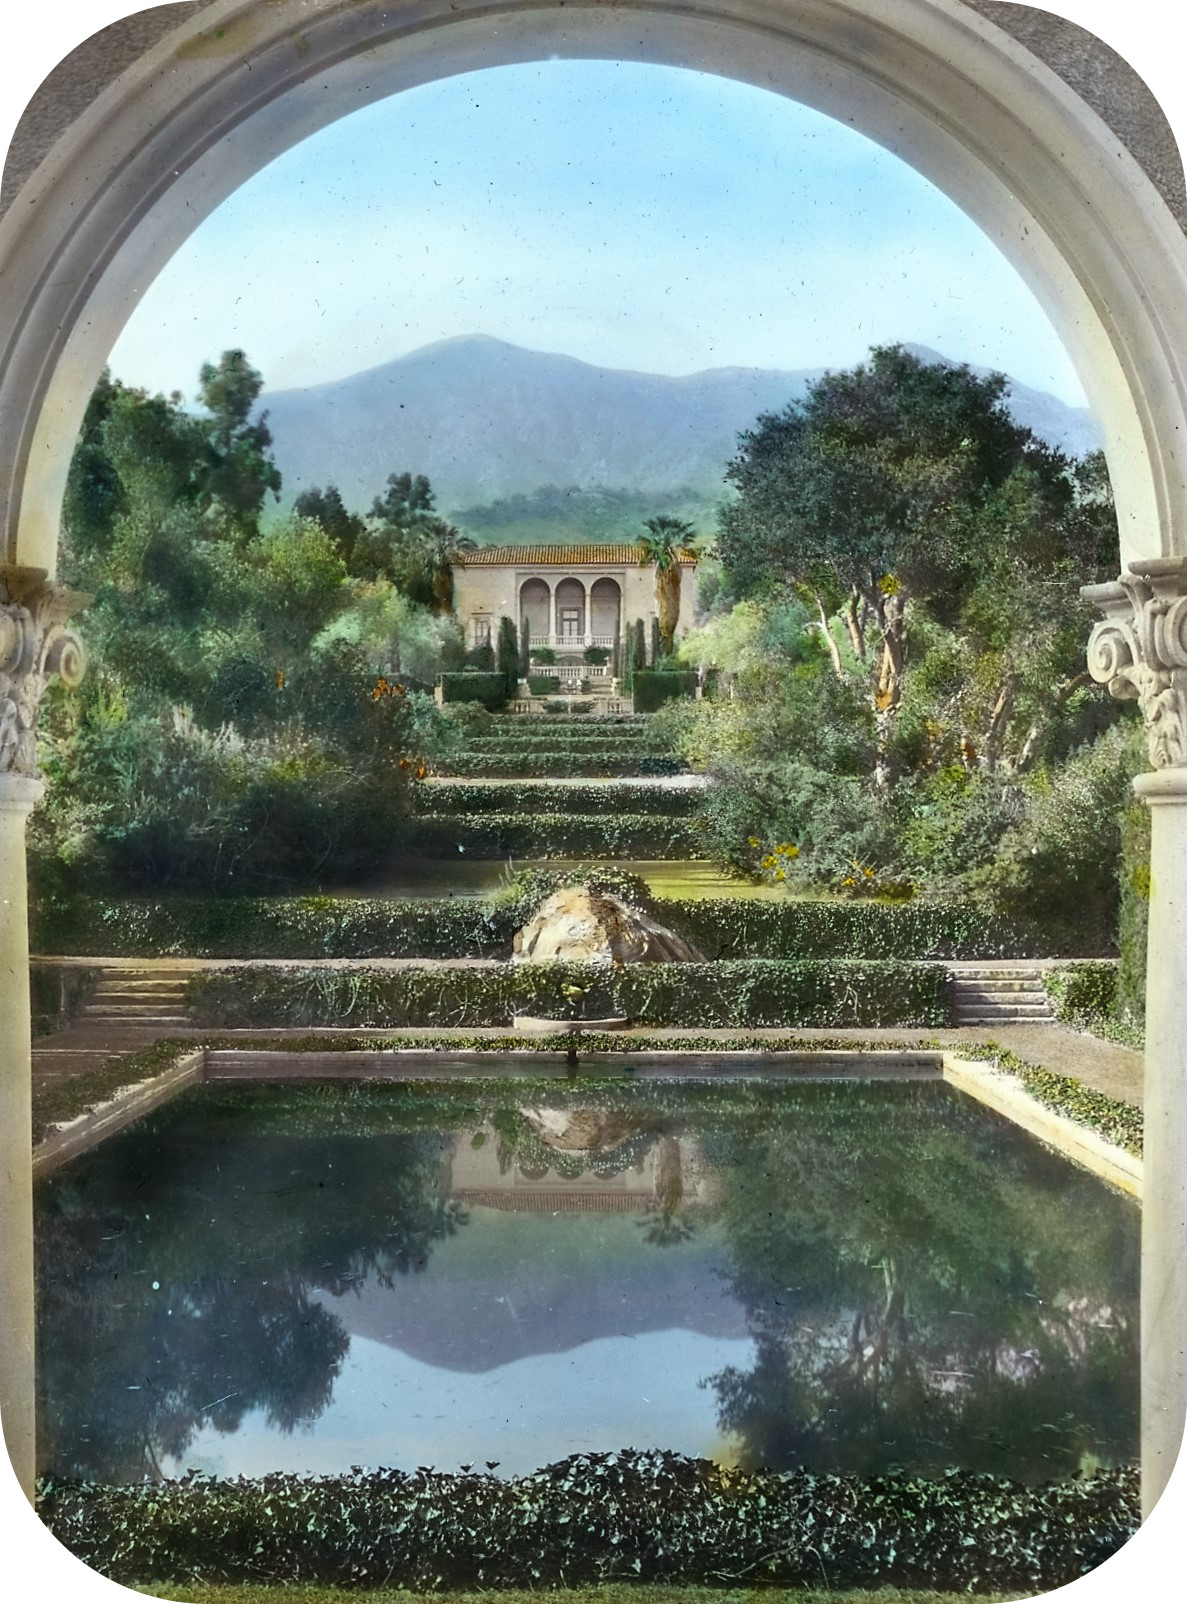 'Las Tejas,' Oakleigh Thorne house, 170 Picacho Road, Montecito, California. View from swimming pool pavilion to house